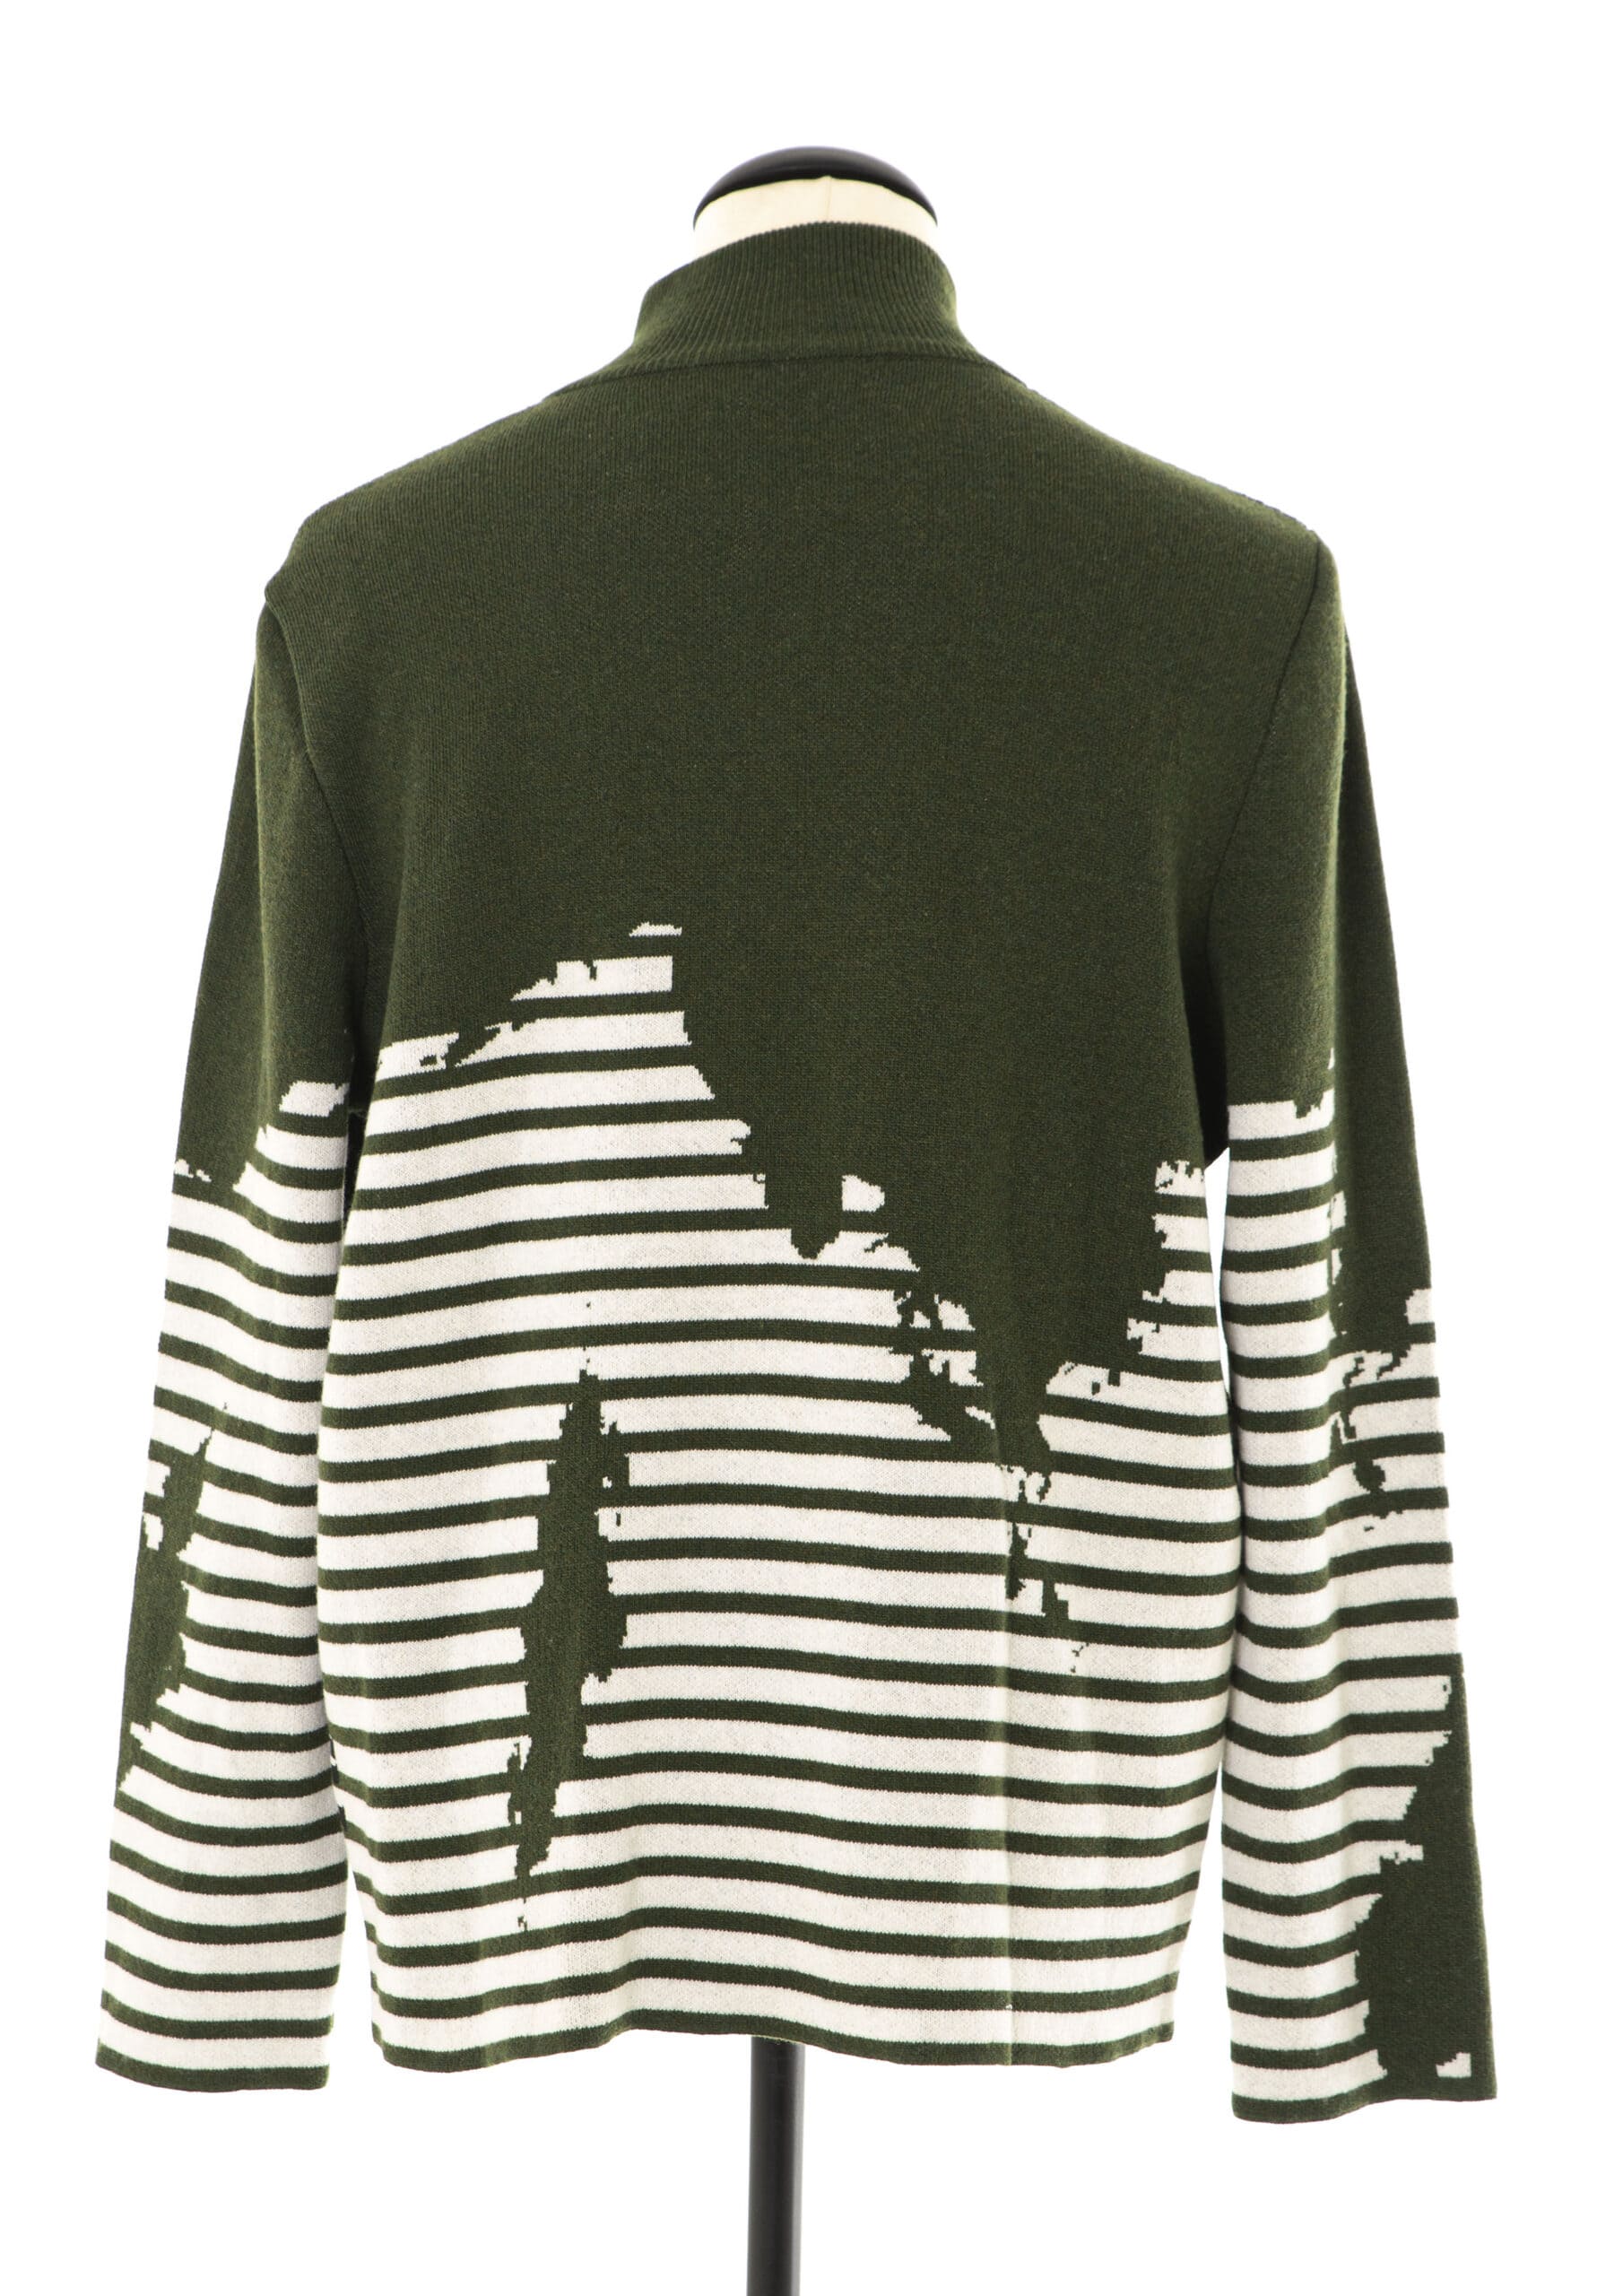 sweater-mad-sailor-green-back